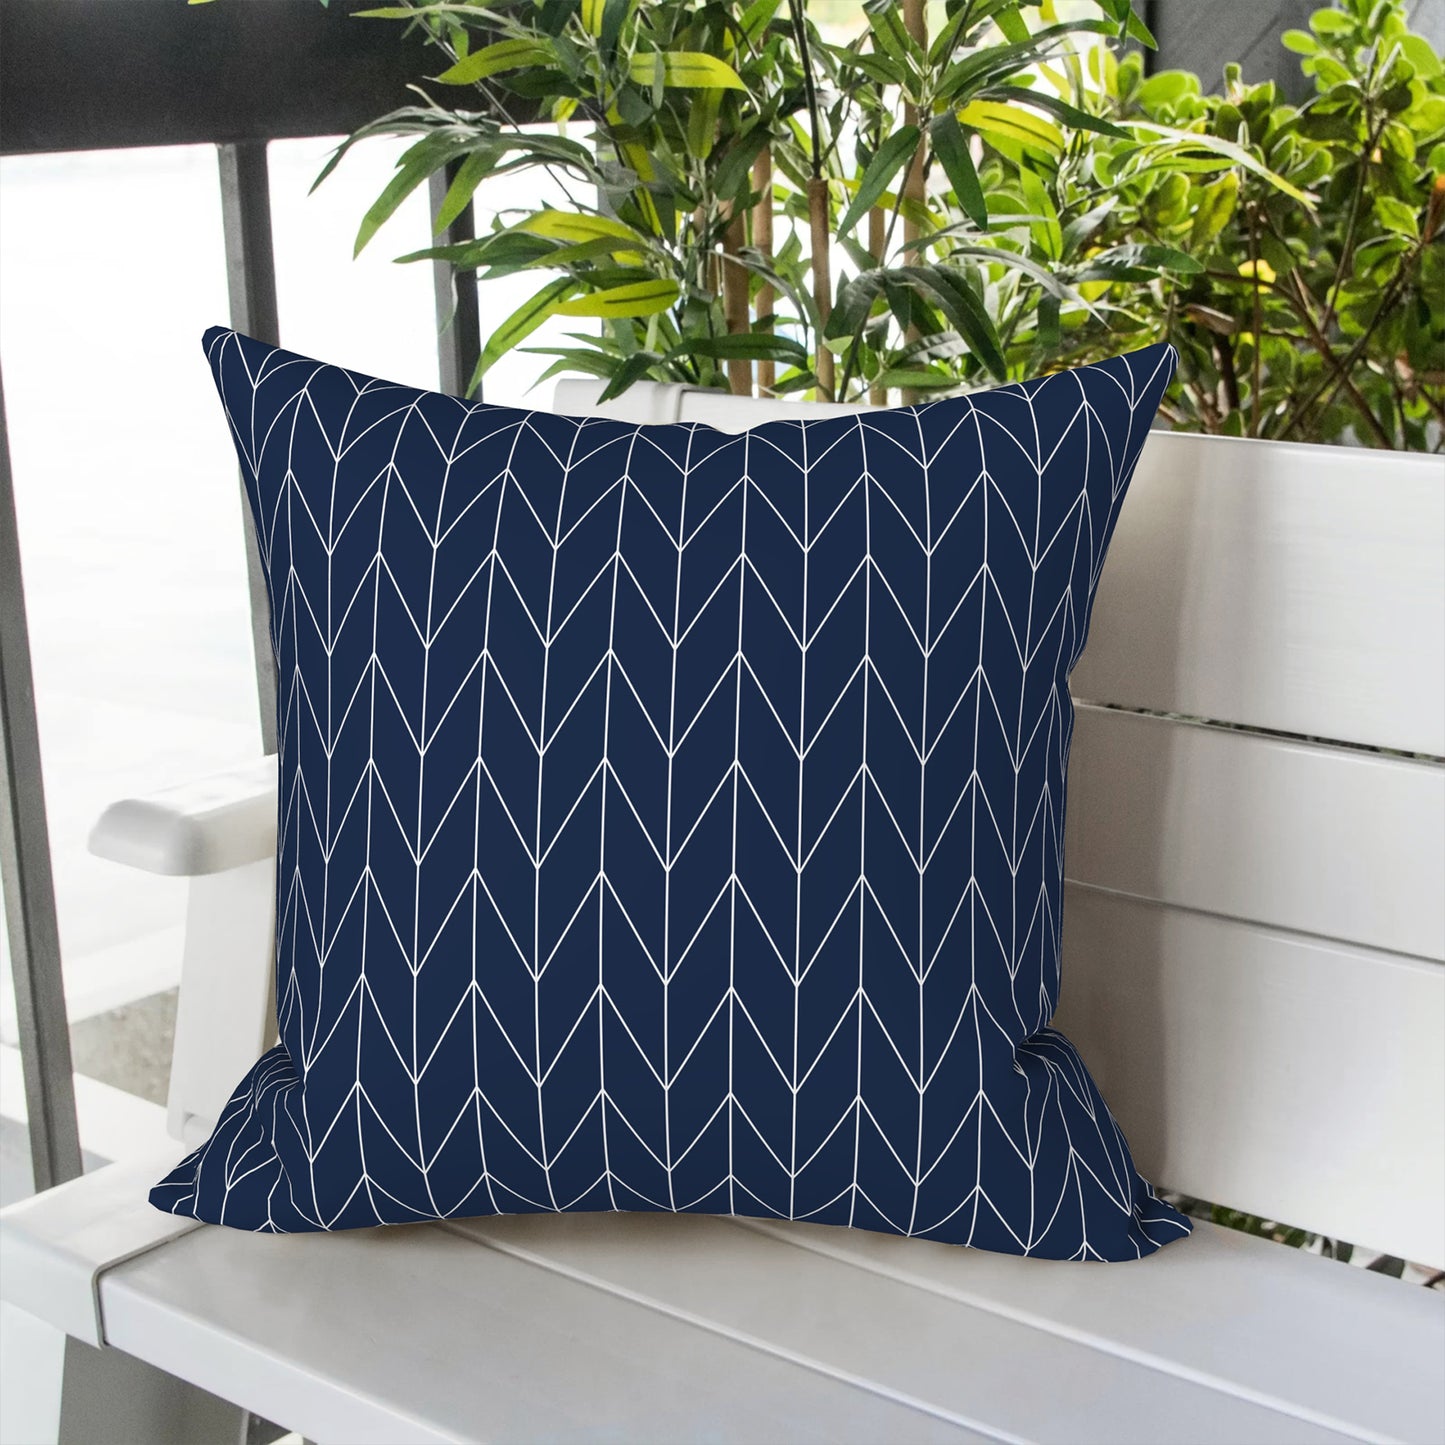 Melody Elephant Outdoor Throw Pillow Covers Pack of 2, Decorative Water Repellent Square Pillow Cases 18x18 Inch, Patio Pillowcases for Home Patio Furniture Use, Herringbone Navy